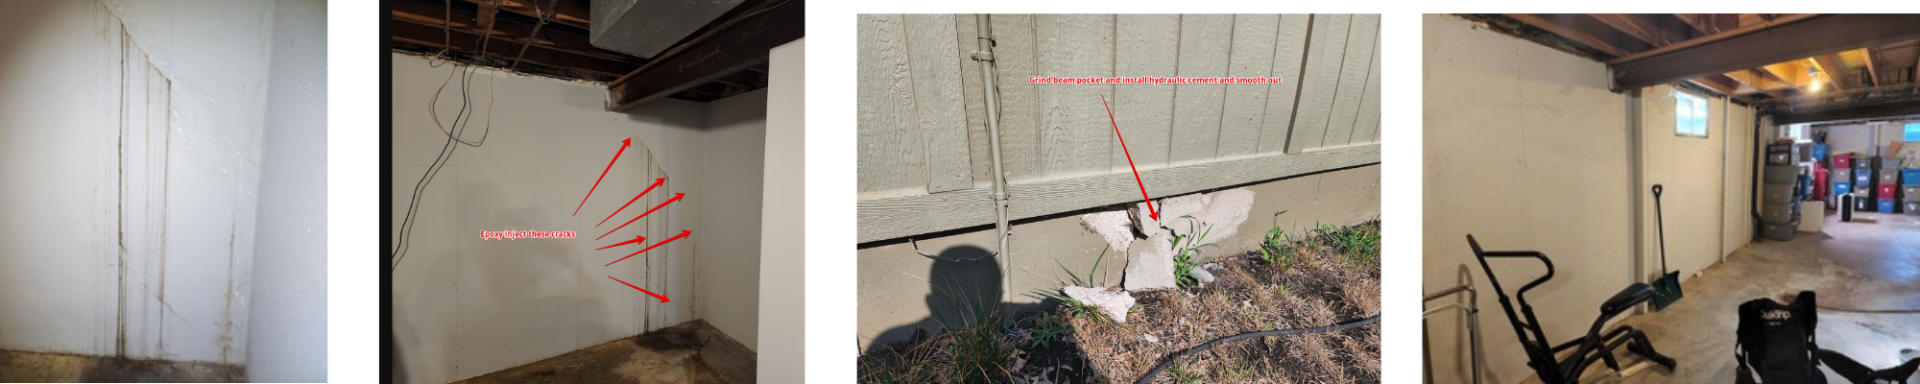 4 side-by-side photos of wall cracks both interior and exterior